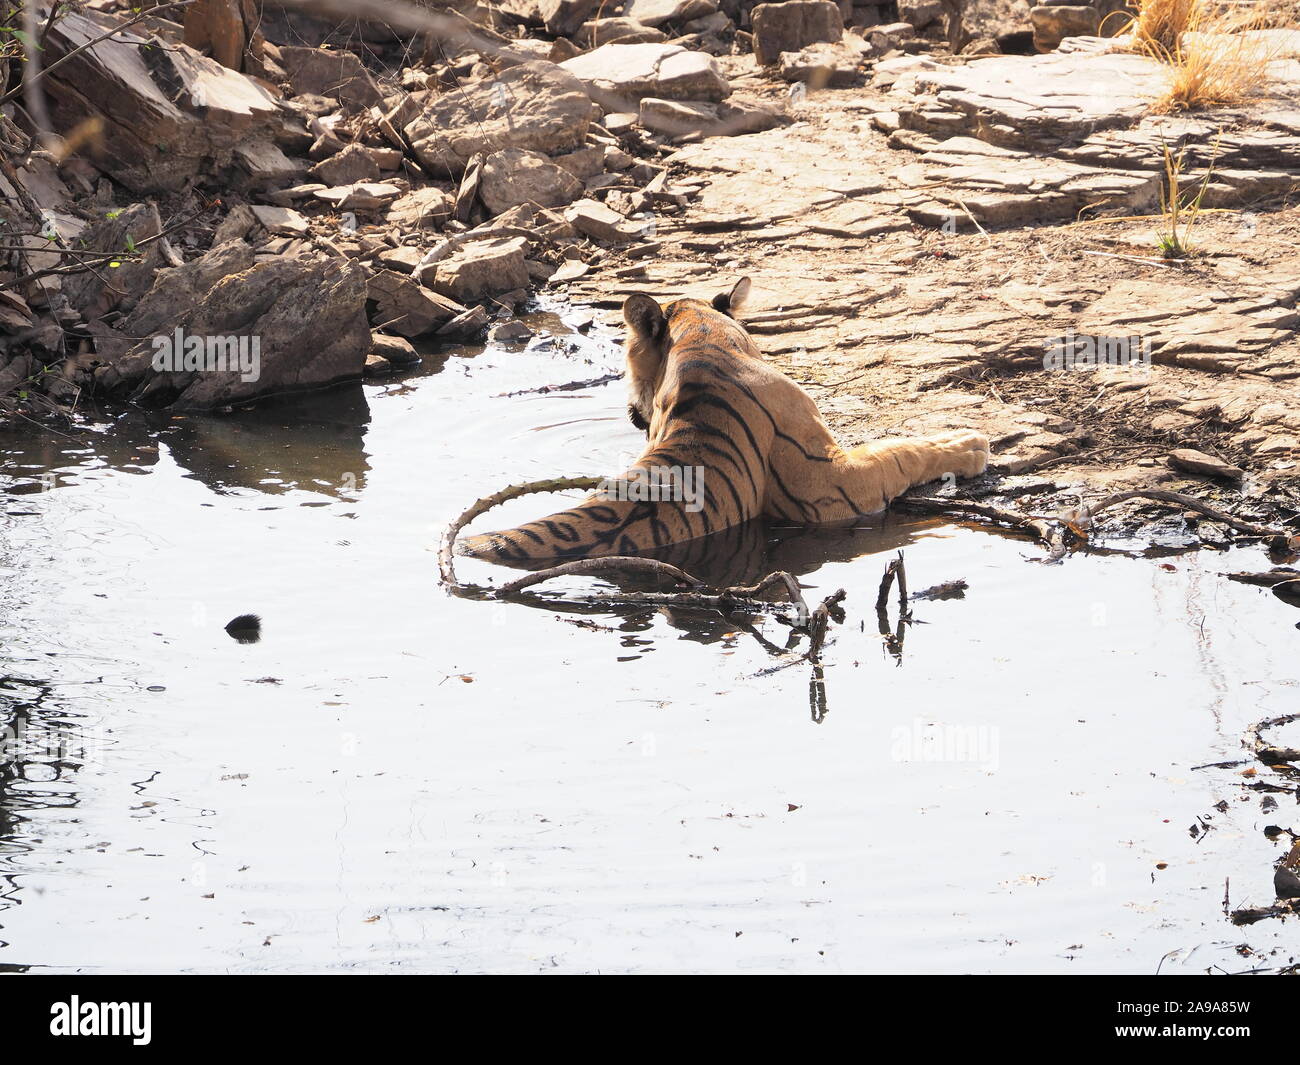 Tiger bathing in waterhole, rear half submerged looking away from camera. Ranthambore India Stock Photo